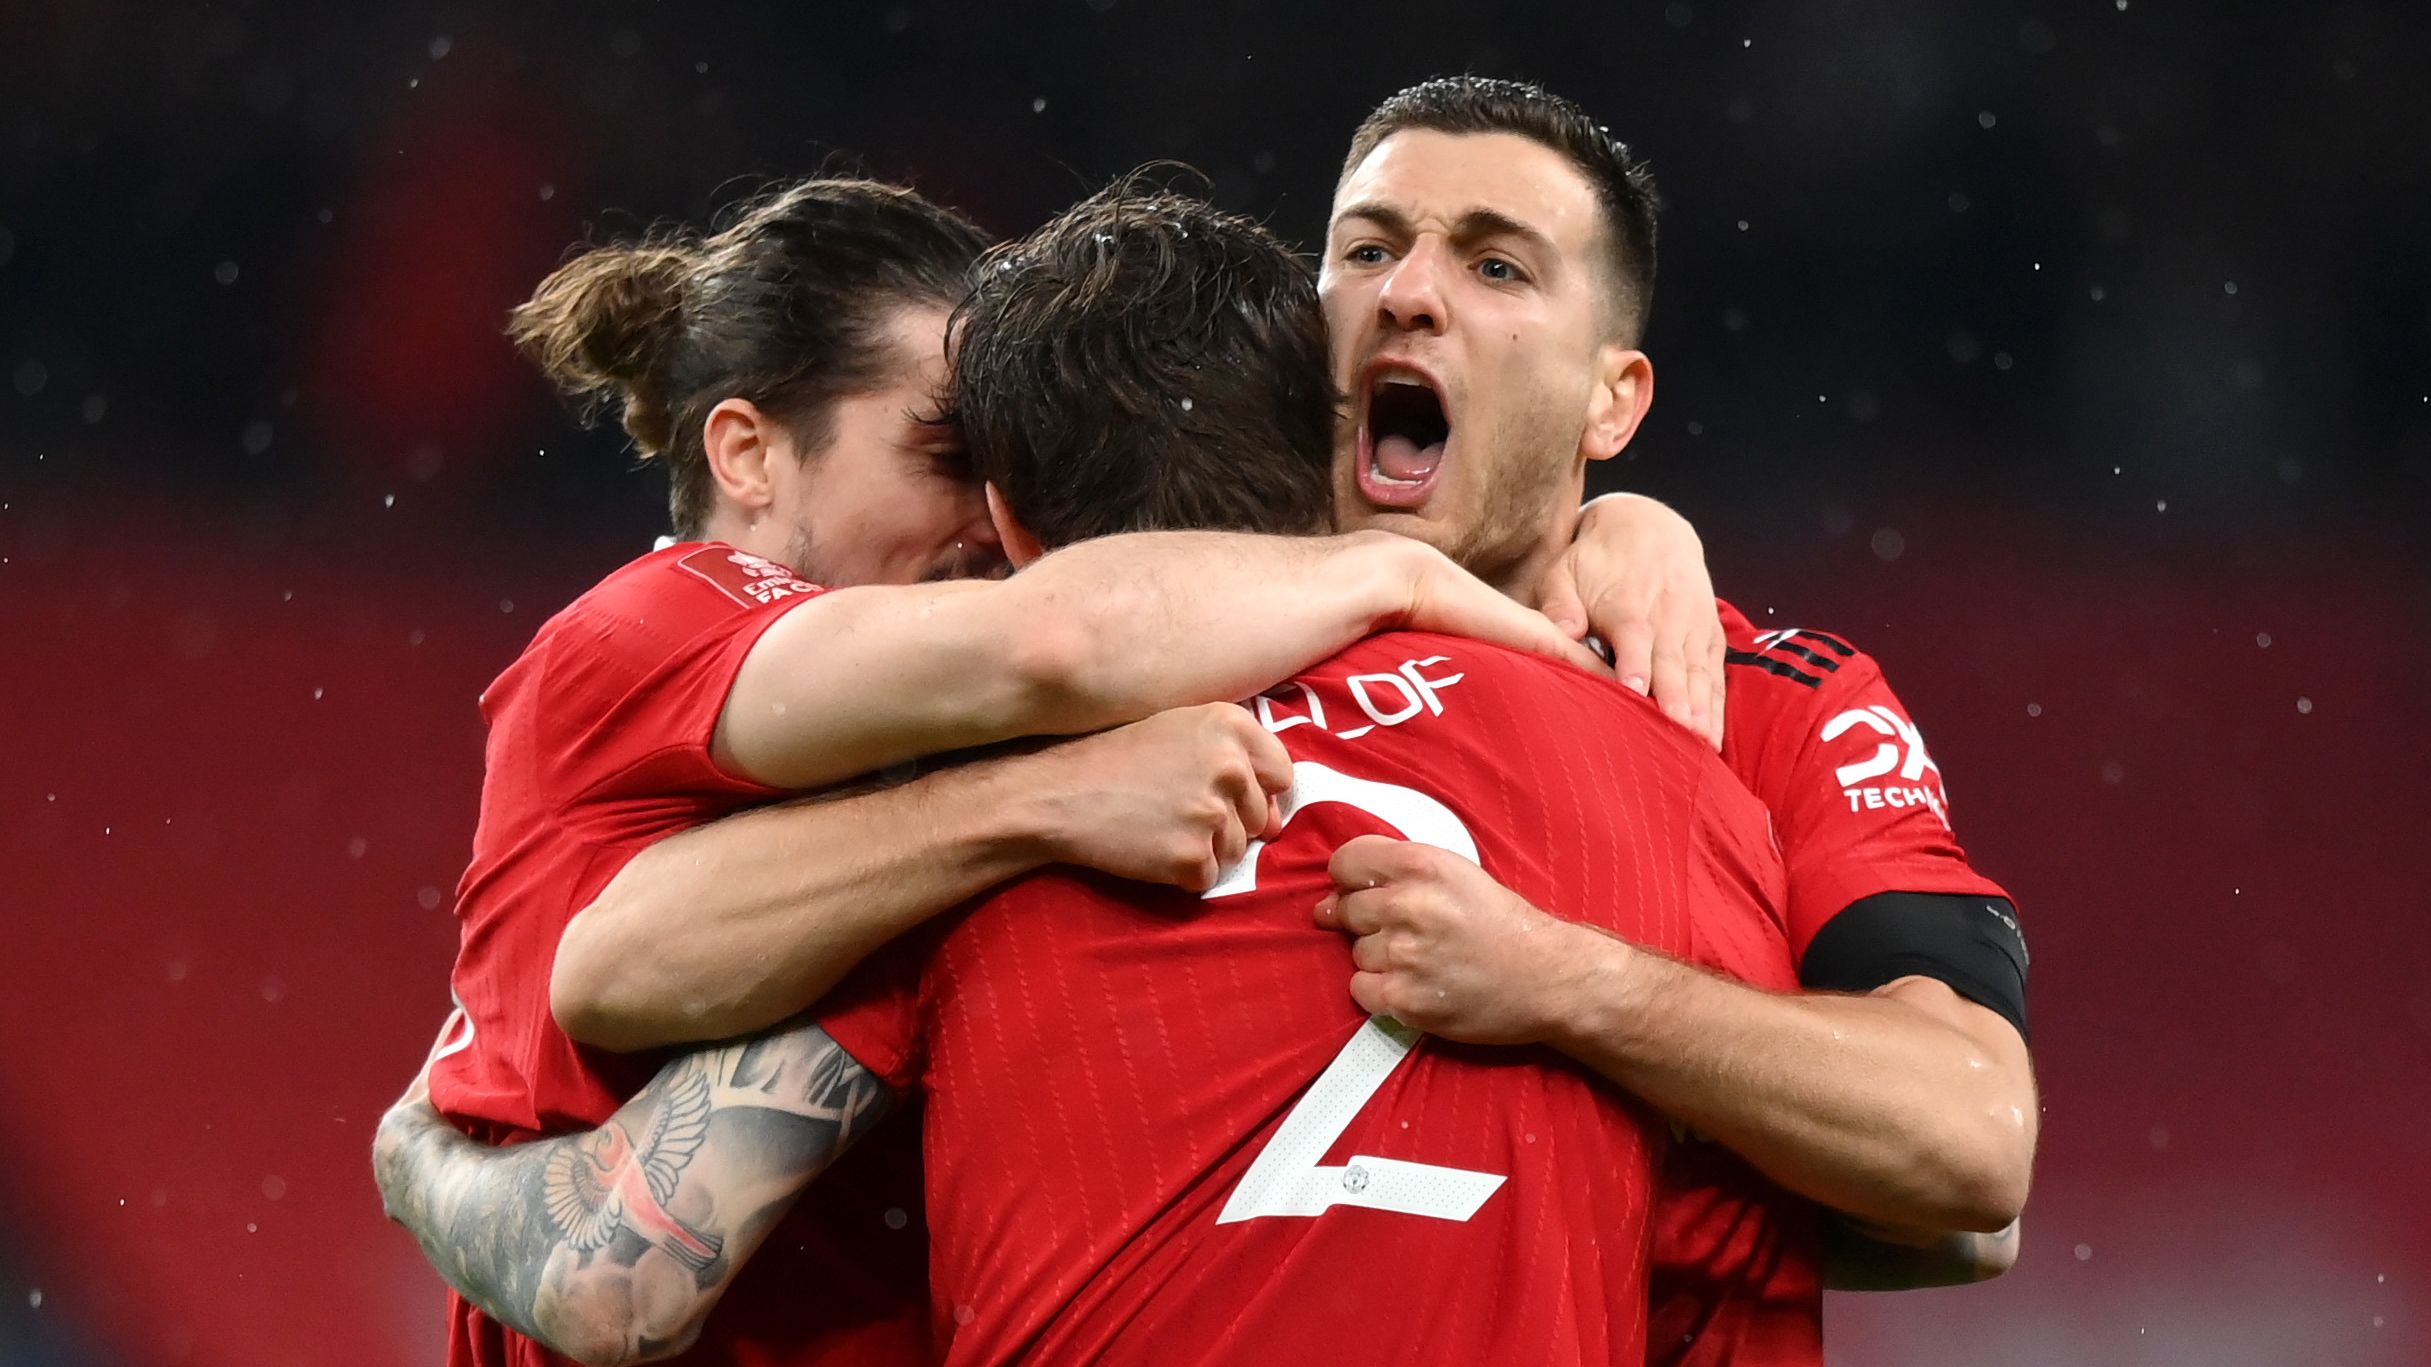 Manchester United clinches marathon penalty shootout over Brighton to set up FA Cup final derby